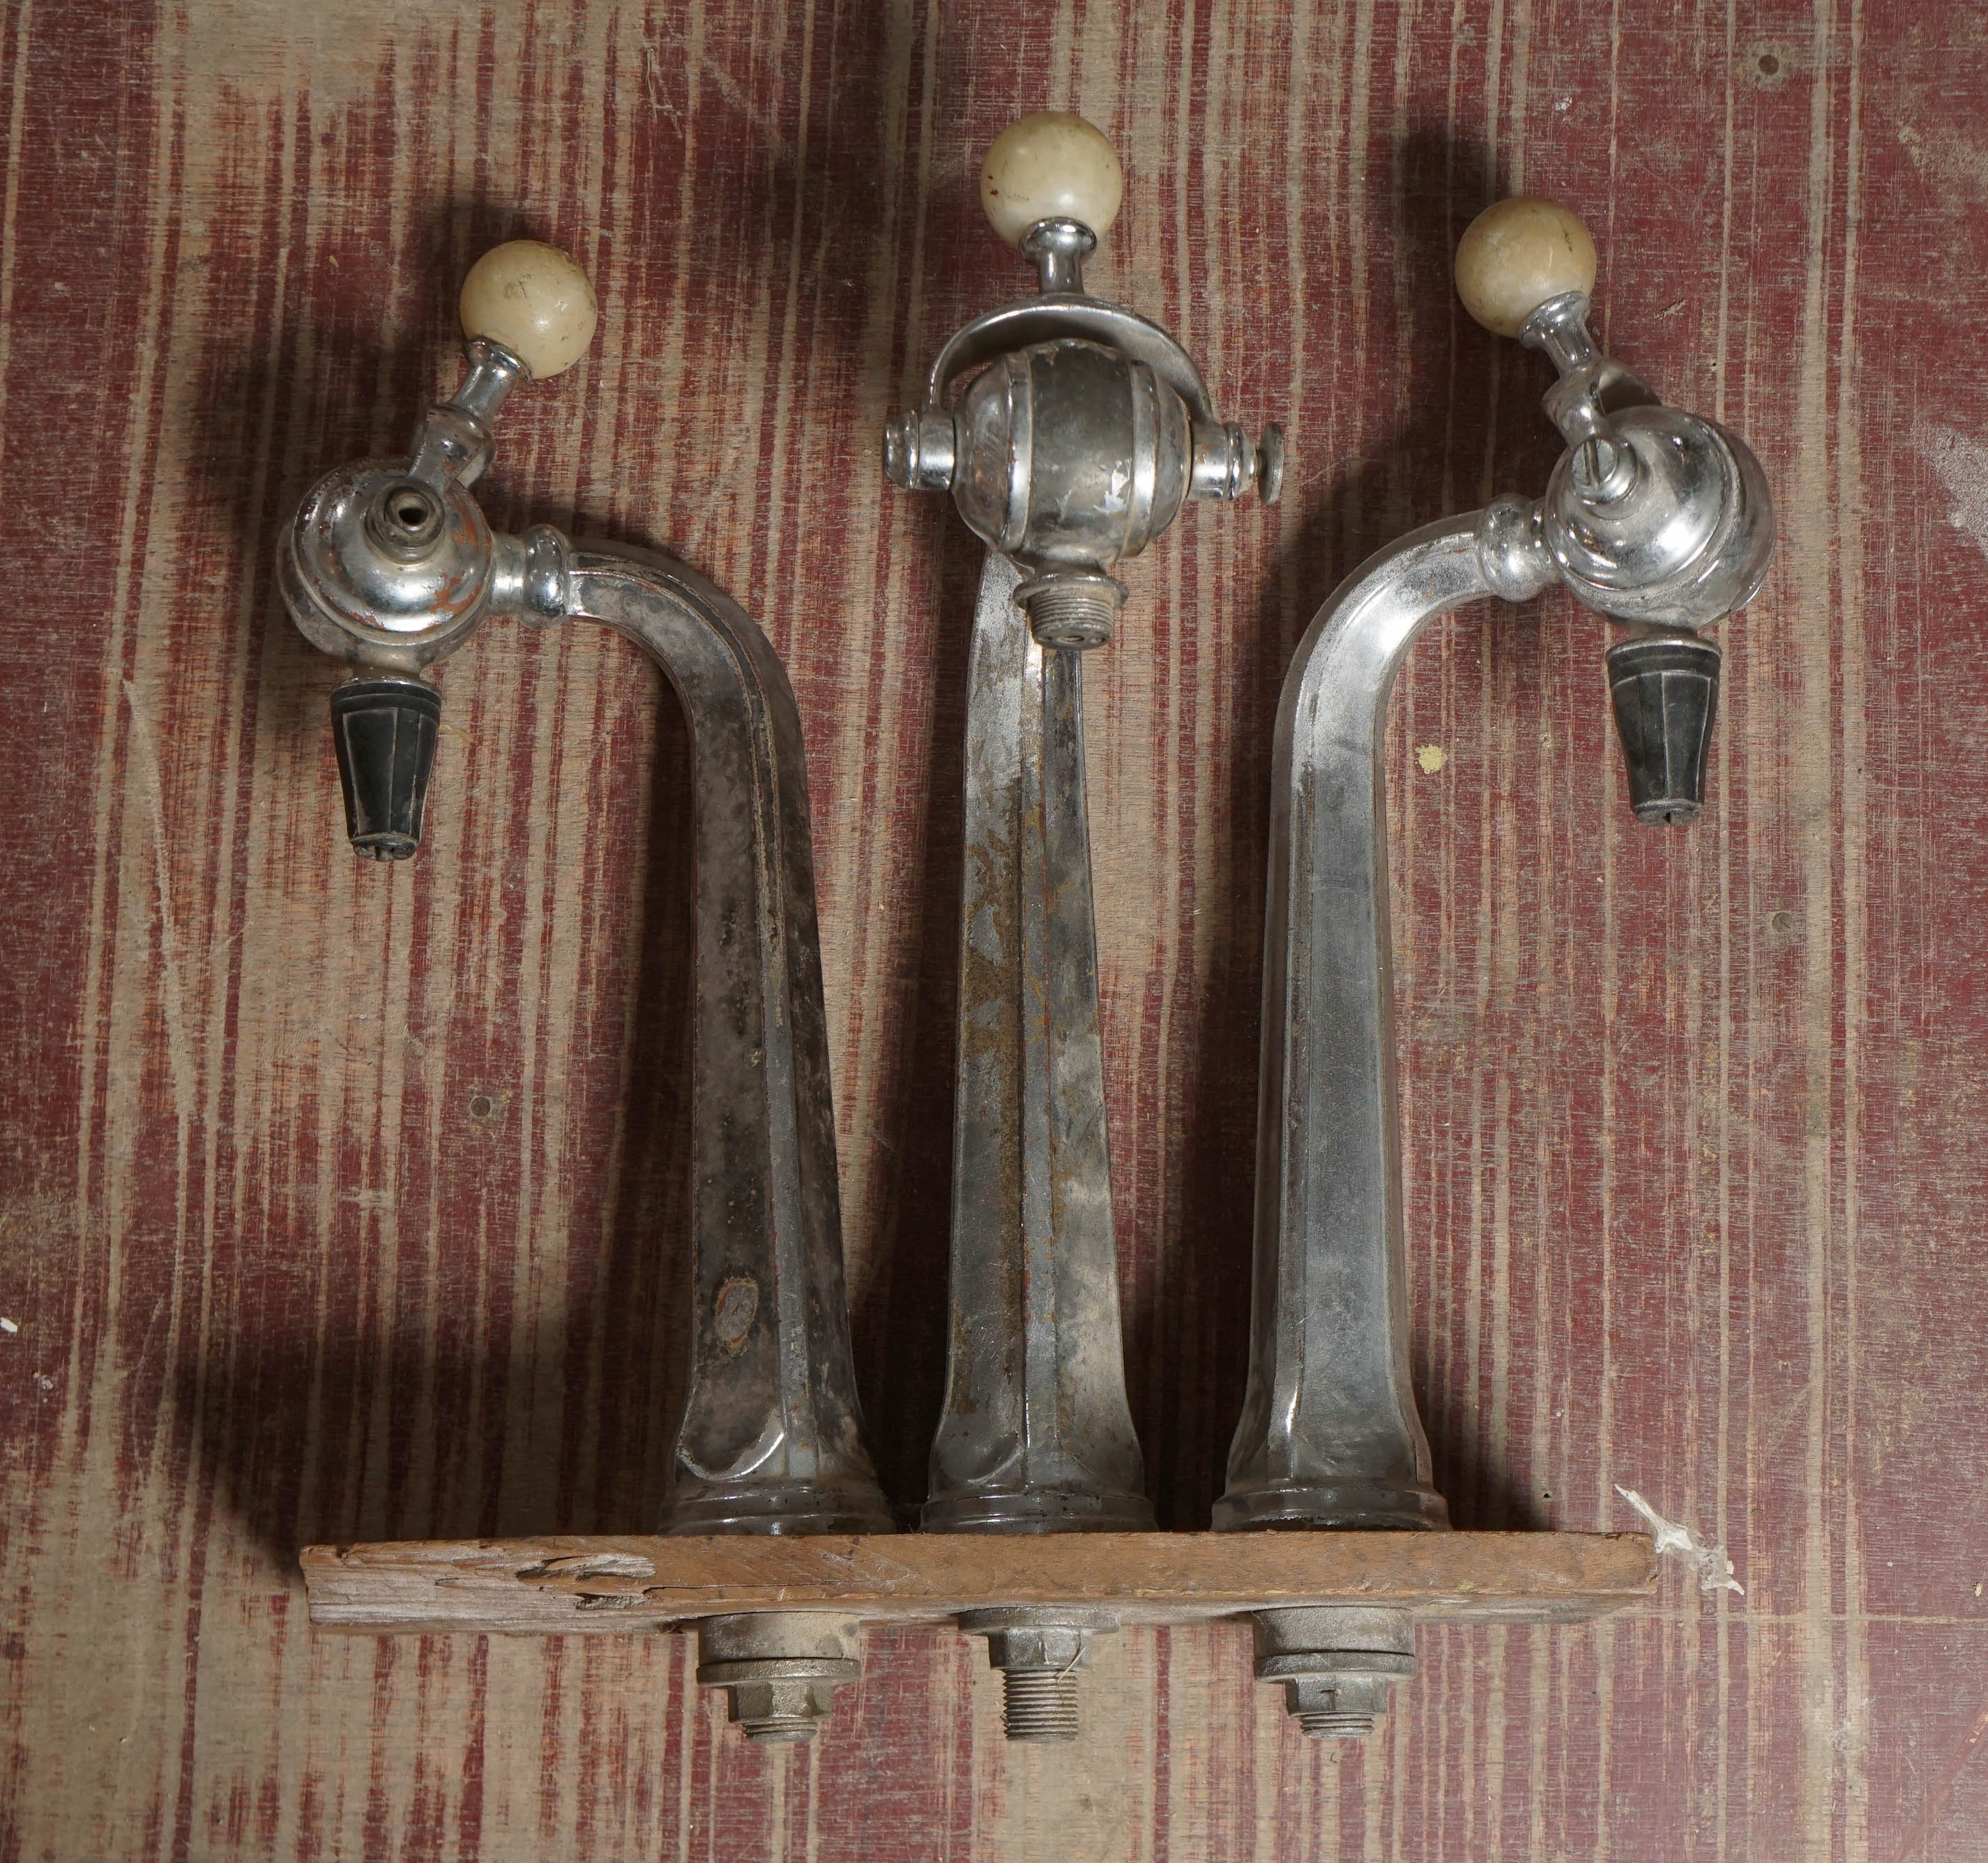 Three matching original spouts for water, seltzer etc. Alabaster handles.